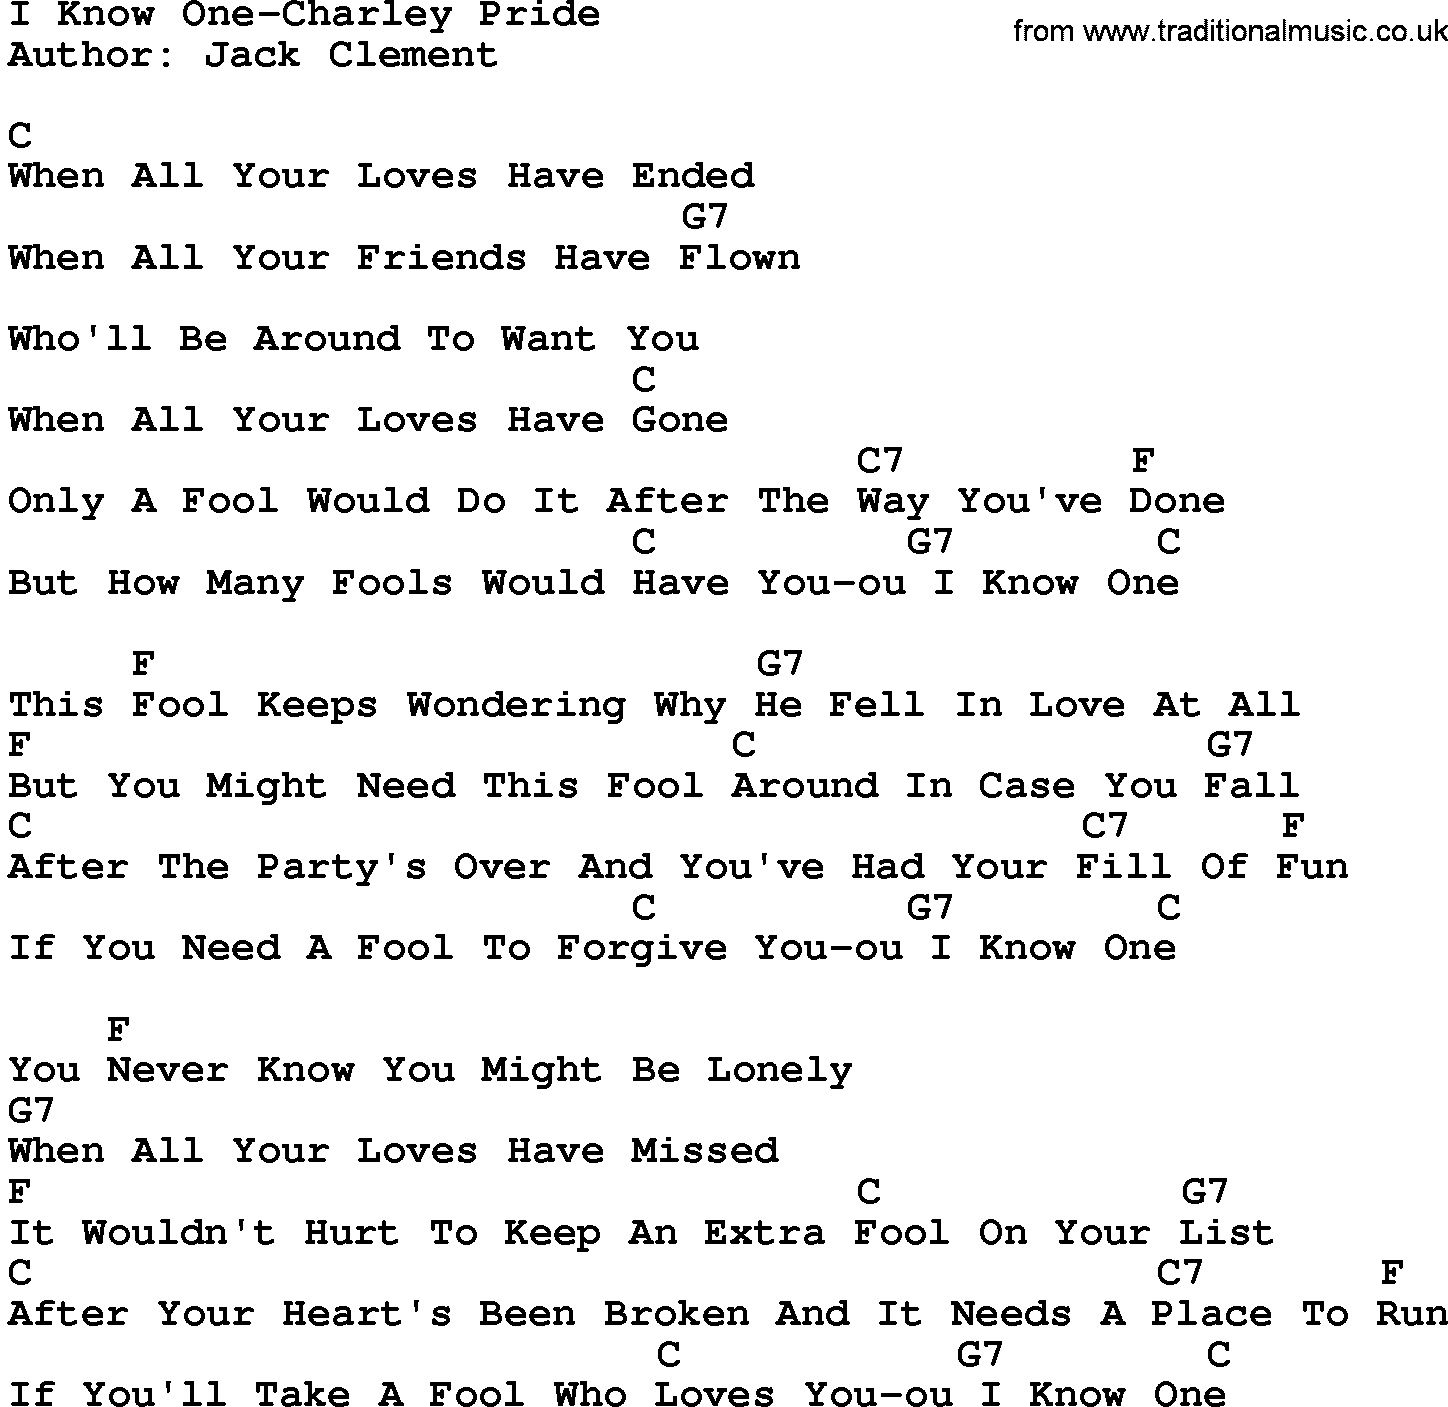 Country music song: I Know One-Charley Pride lyrics and chords